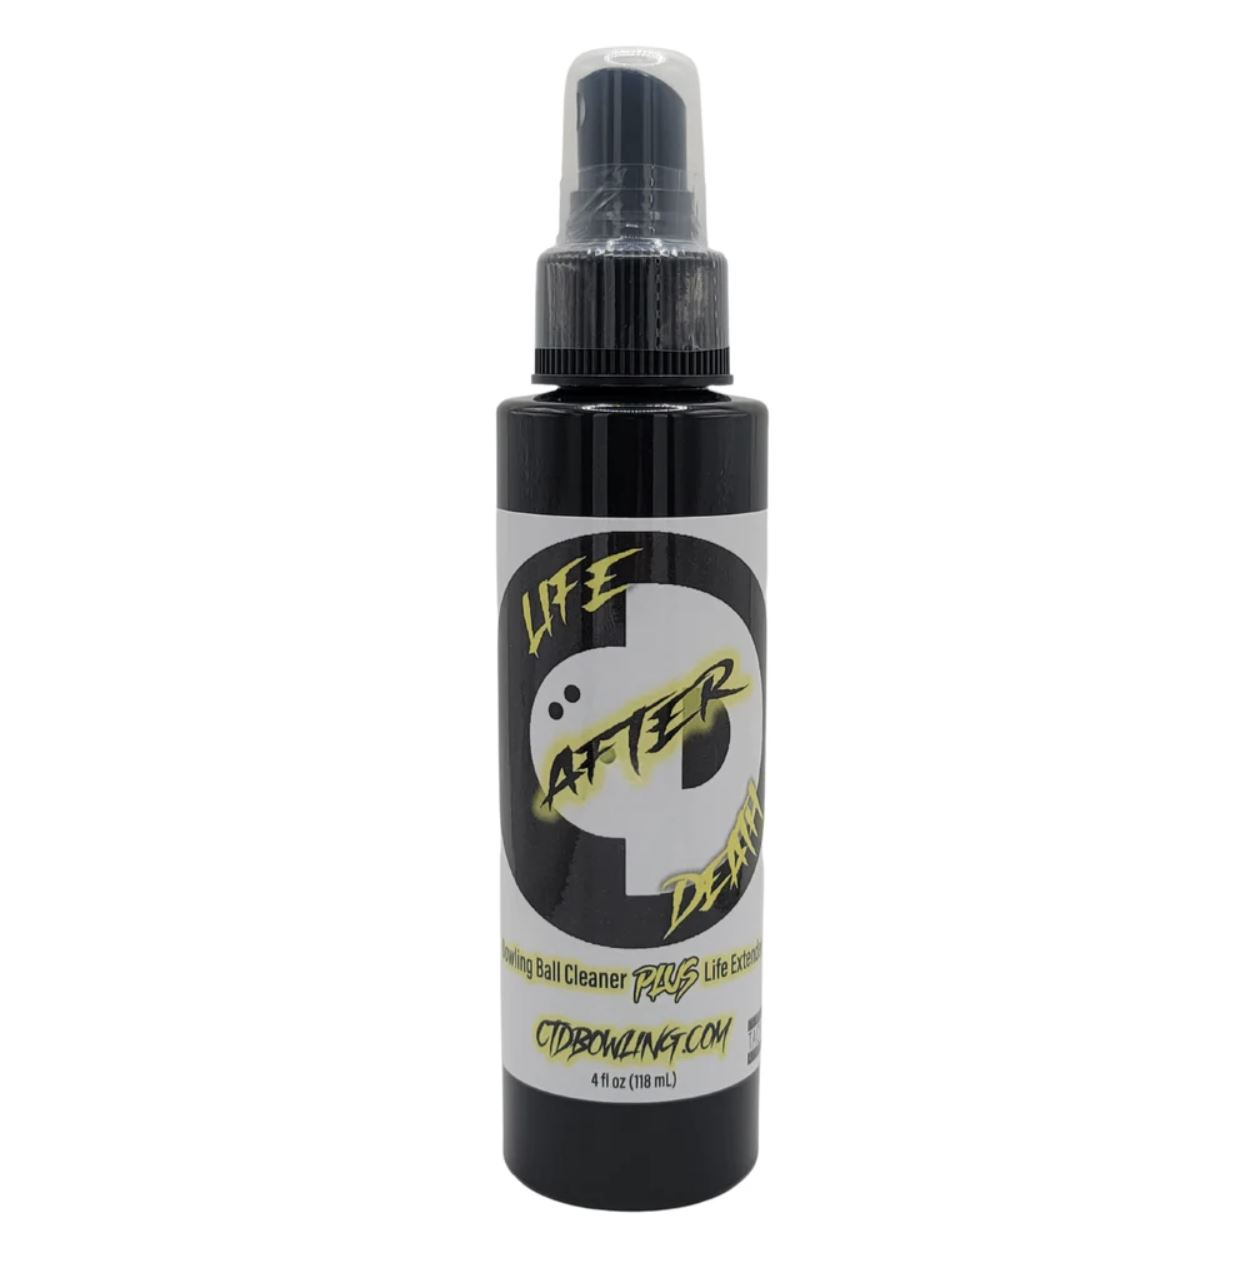 Life After Death | Bowling Ball Cleaner + Life Extender - 4oz (118ml)